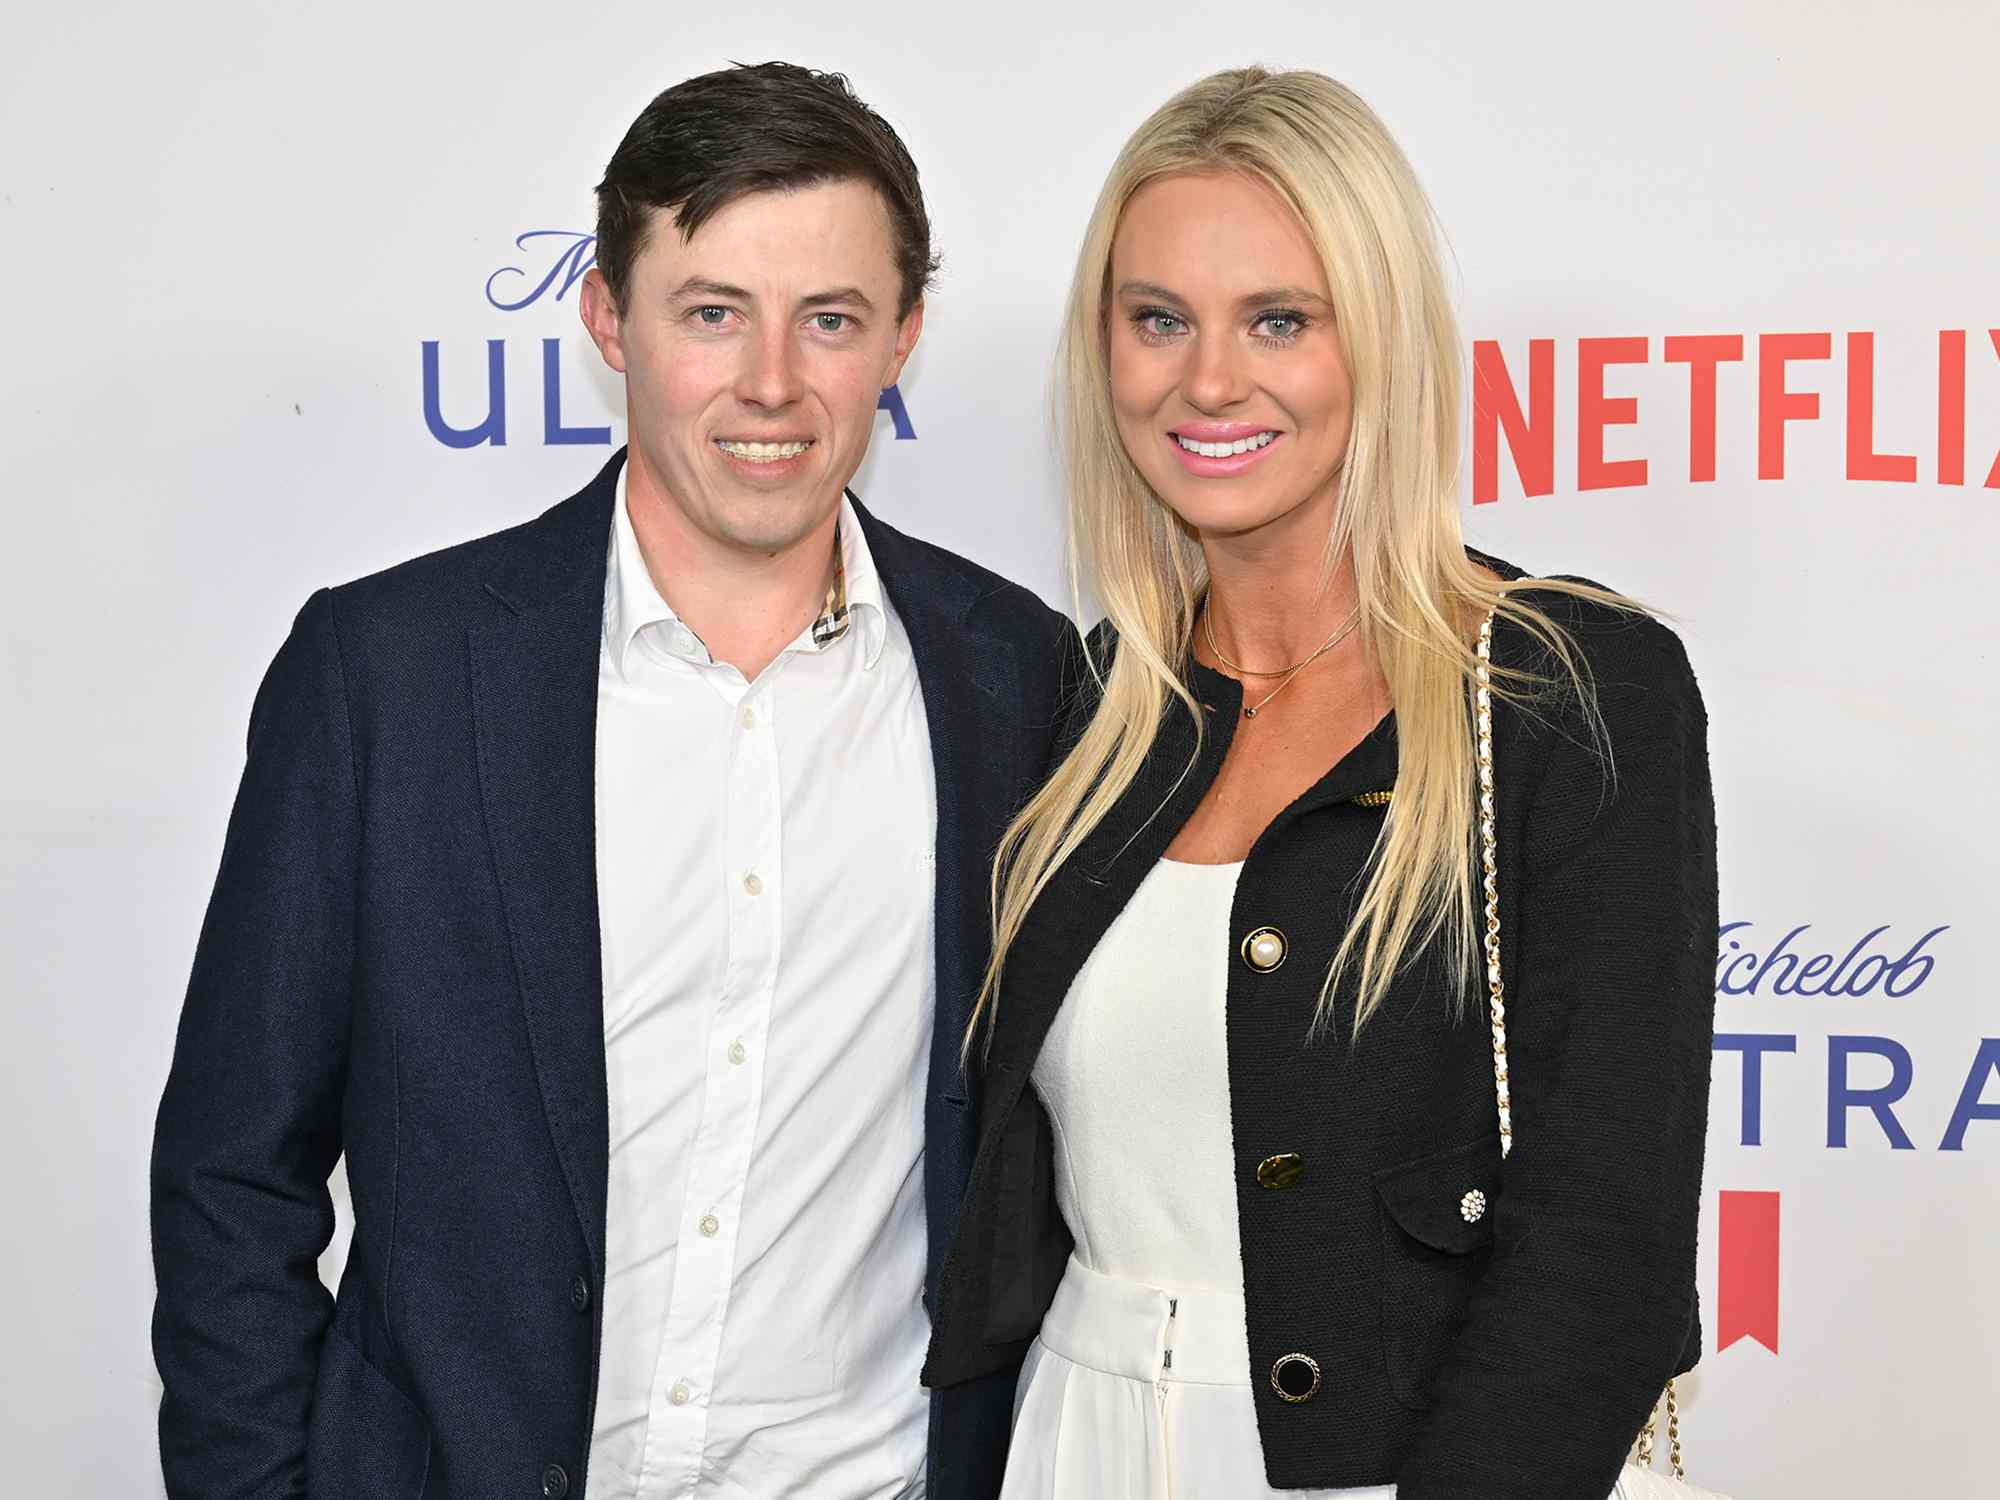 Matthew Fitzpatrick of England poses for a photo during the Michelob Ultra & Netflix Full Swing Premiere & Super Bowl After Party on February 11, 2023